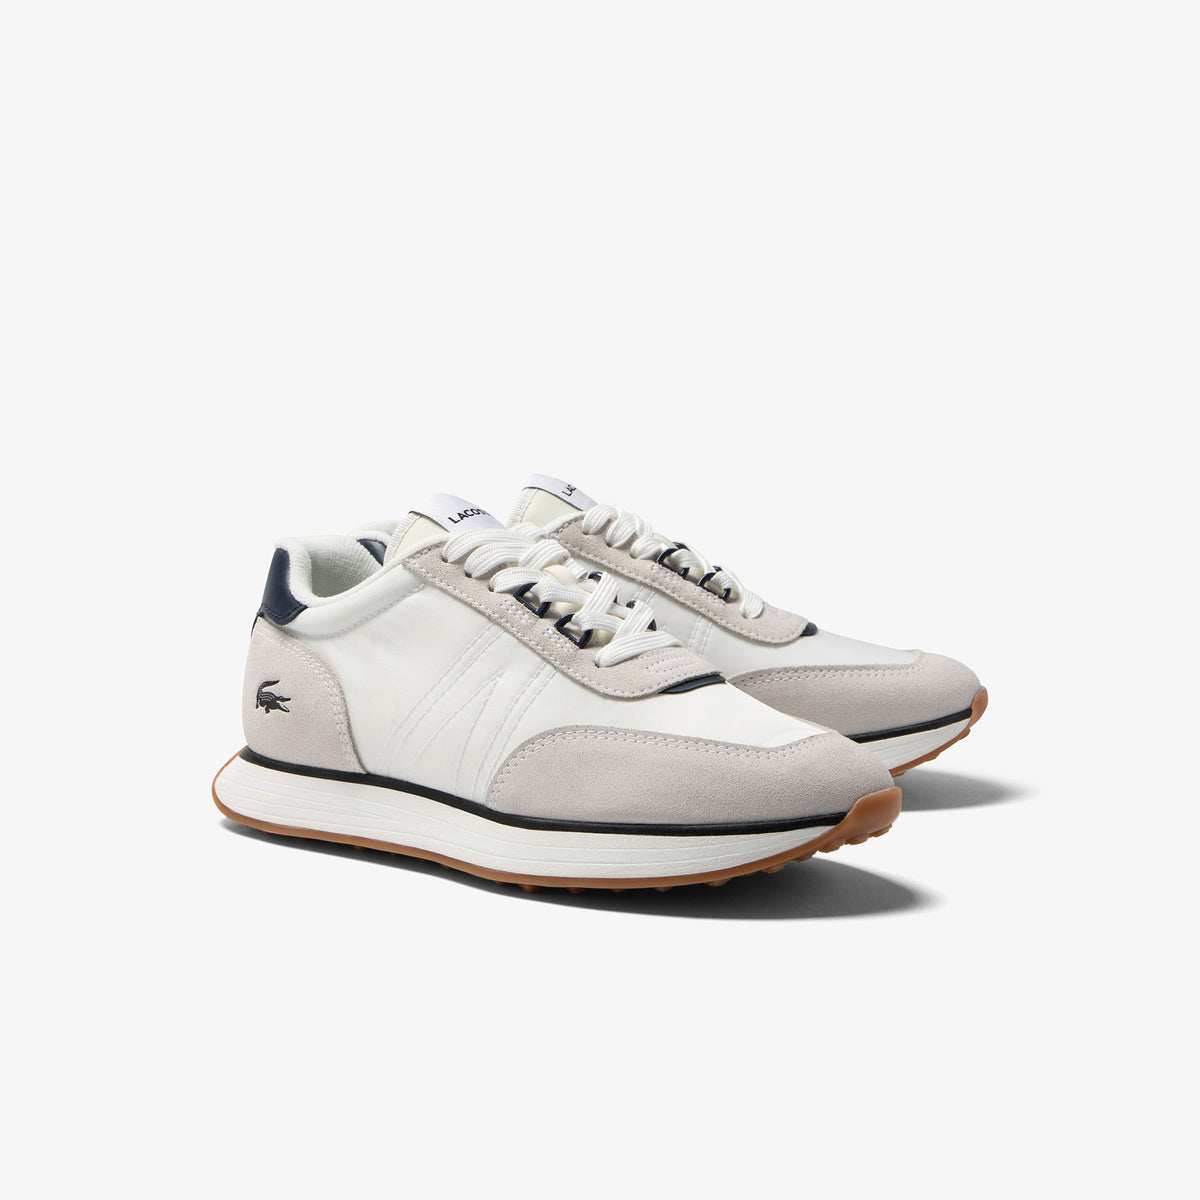 Men's Lacoste L-Spin Textile Sneakers - White/Navy